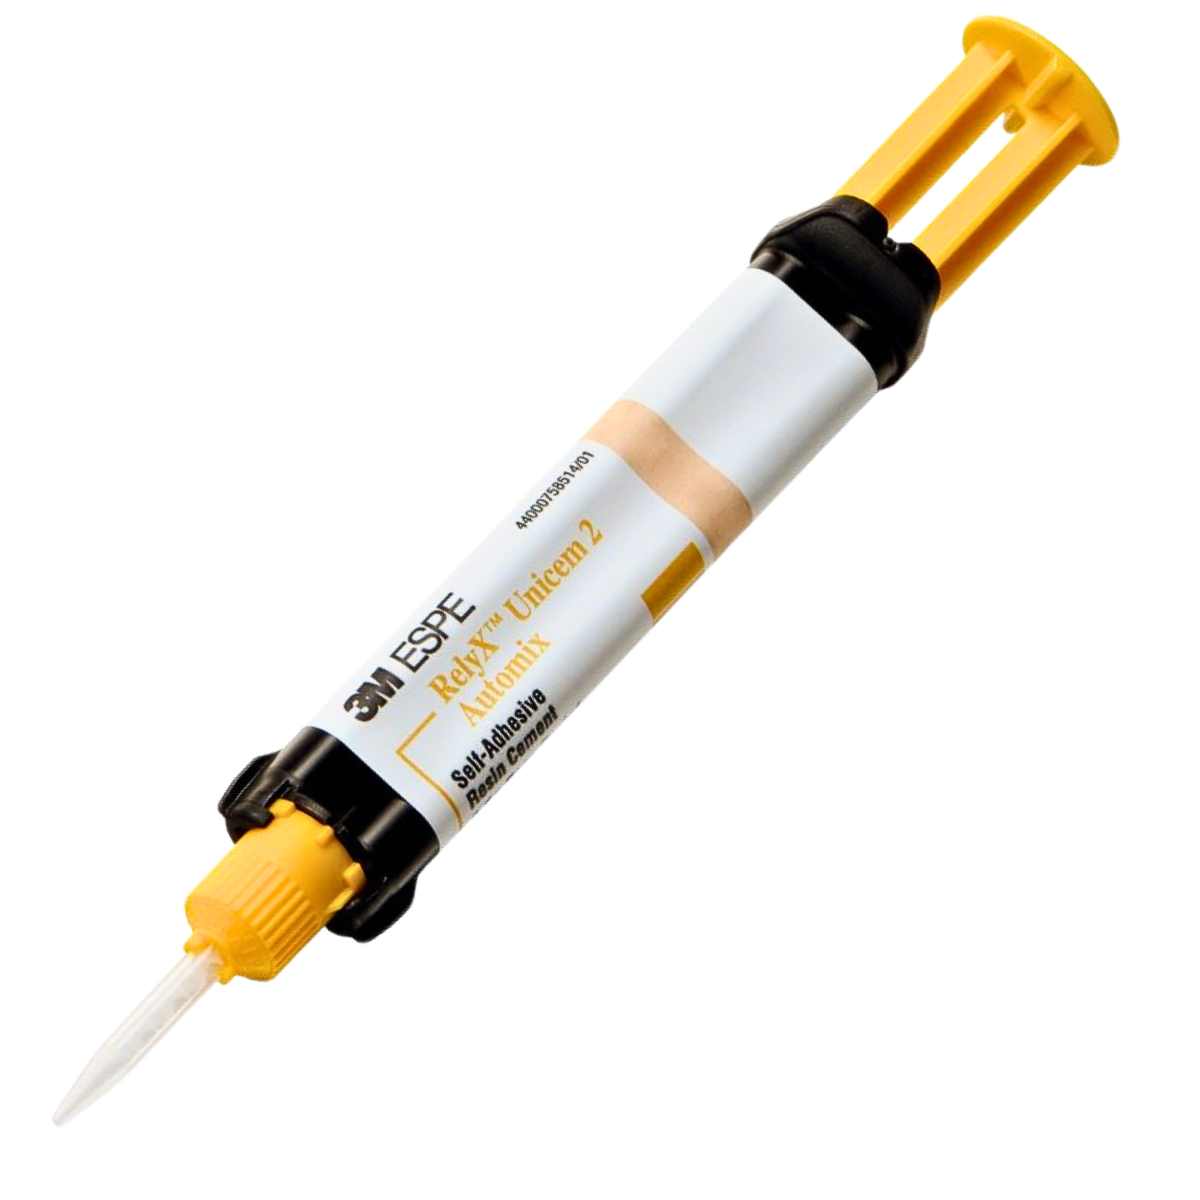 3M RelyX U200 Automix Self-Adhesive Resin Cement  8.5g syringe